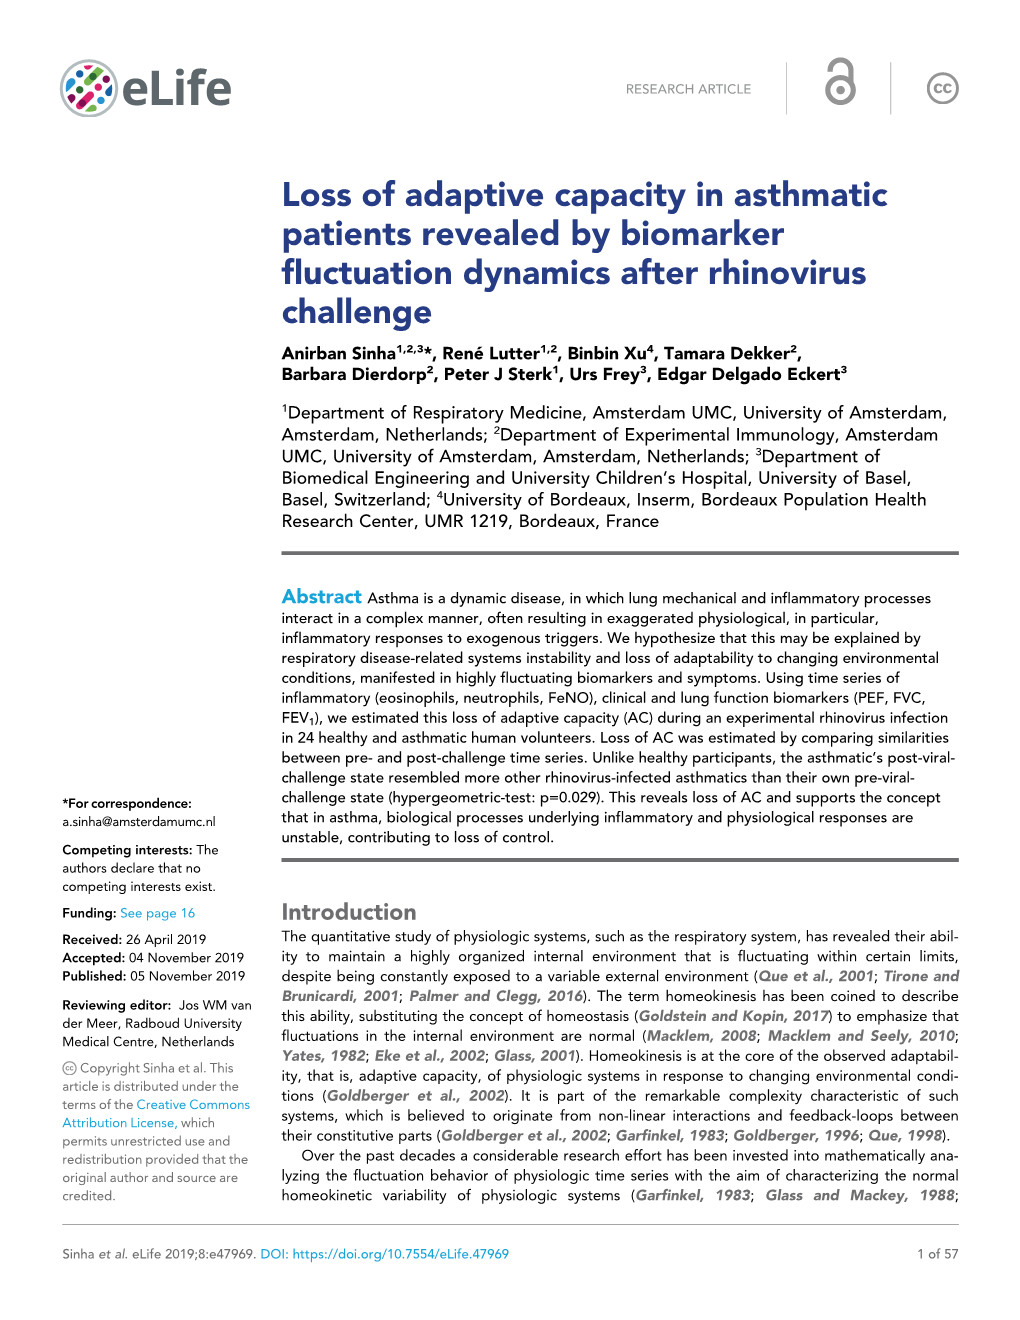 Loss of Adaptive Capacity in Asthmatic Patients Revealed by Biomarker